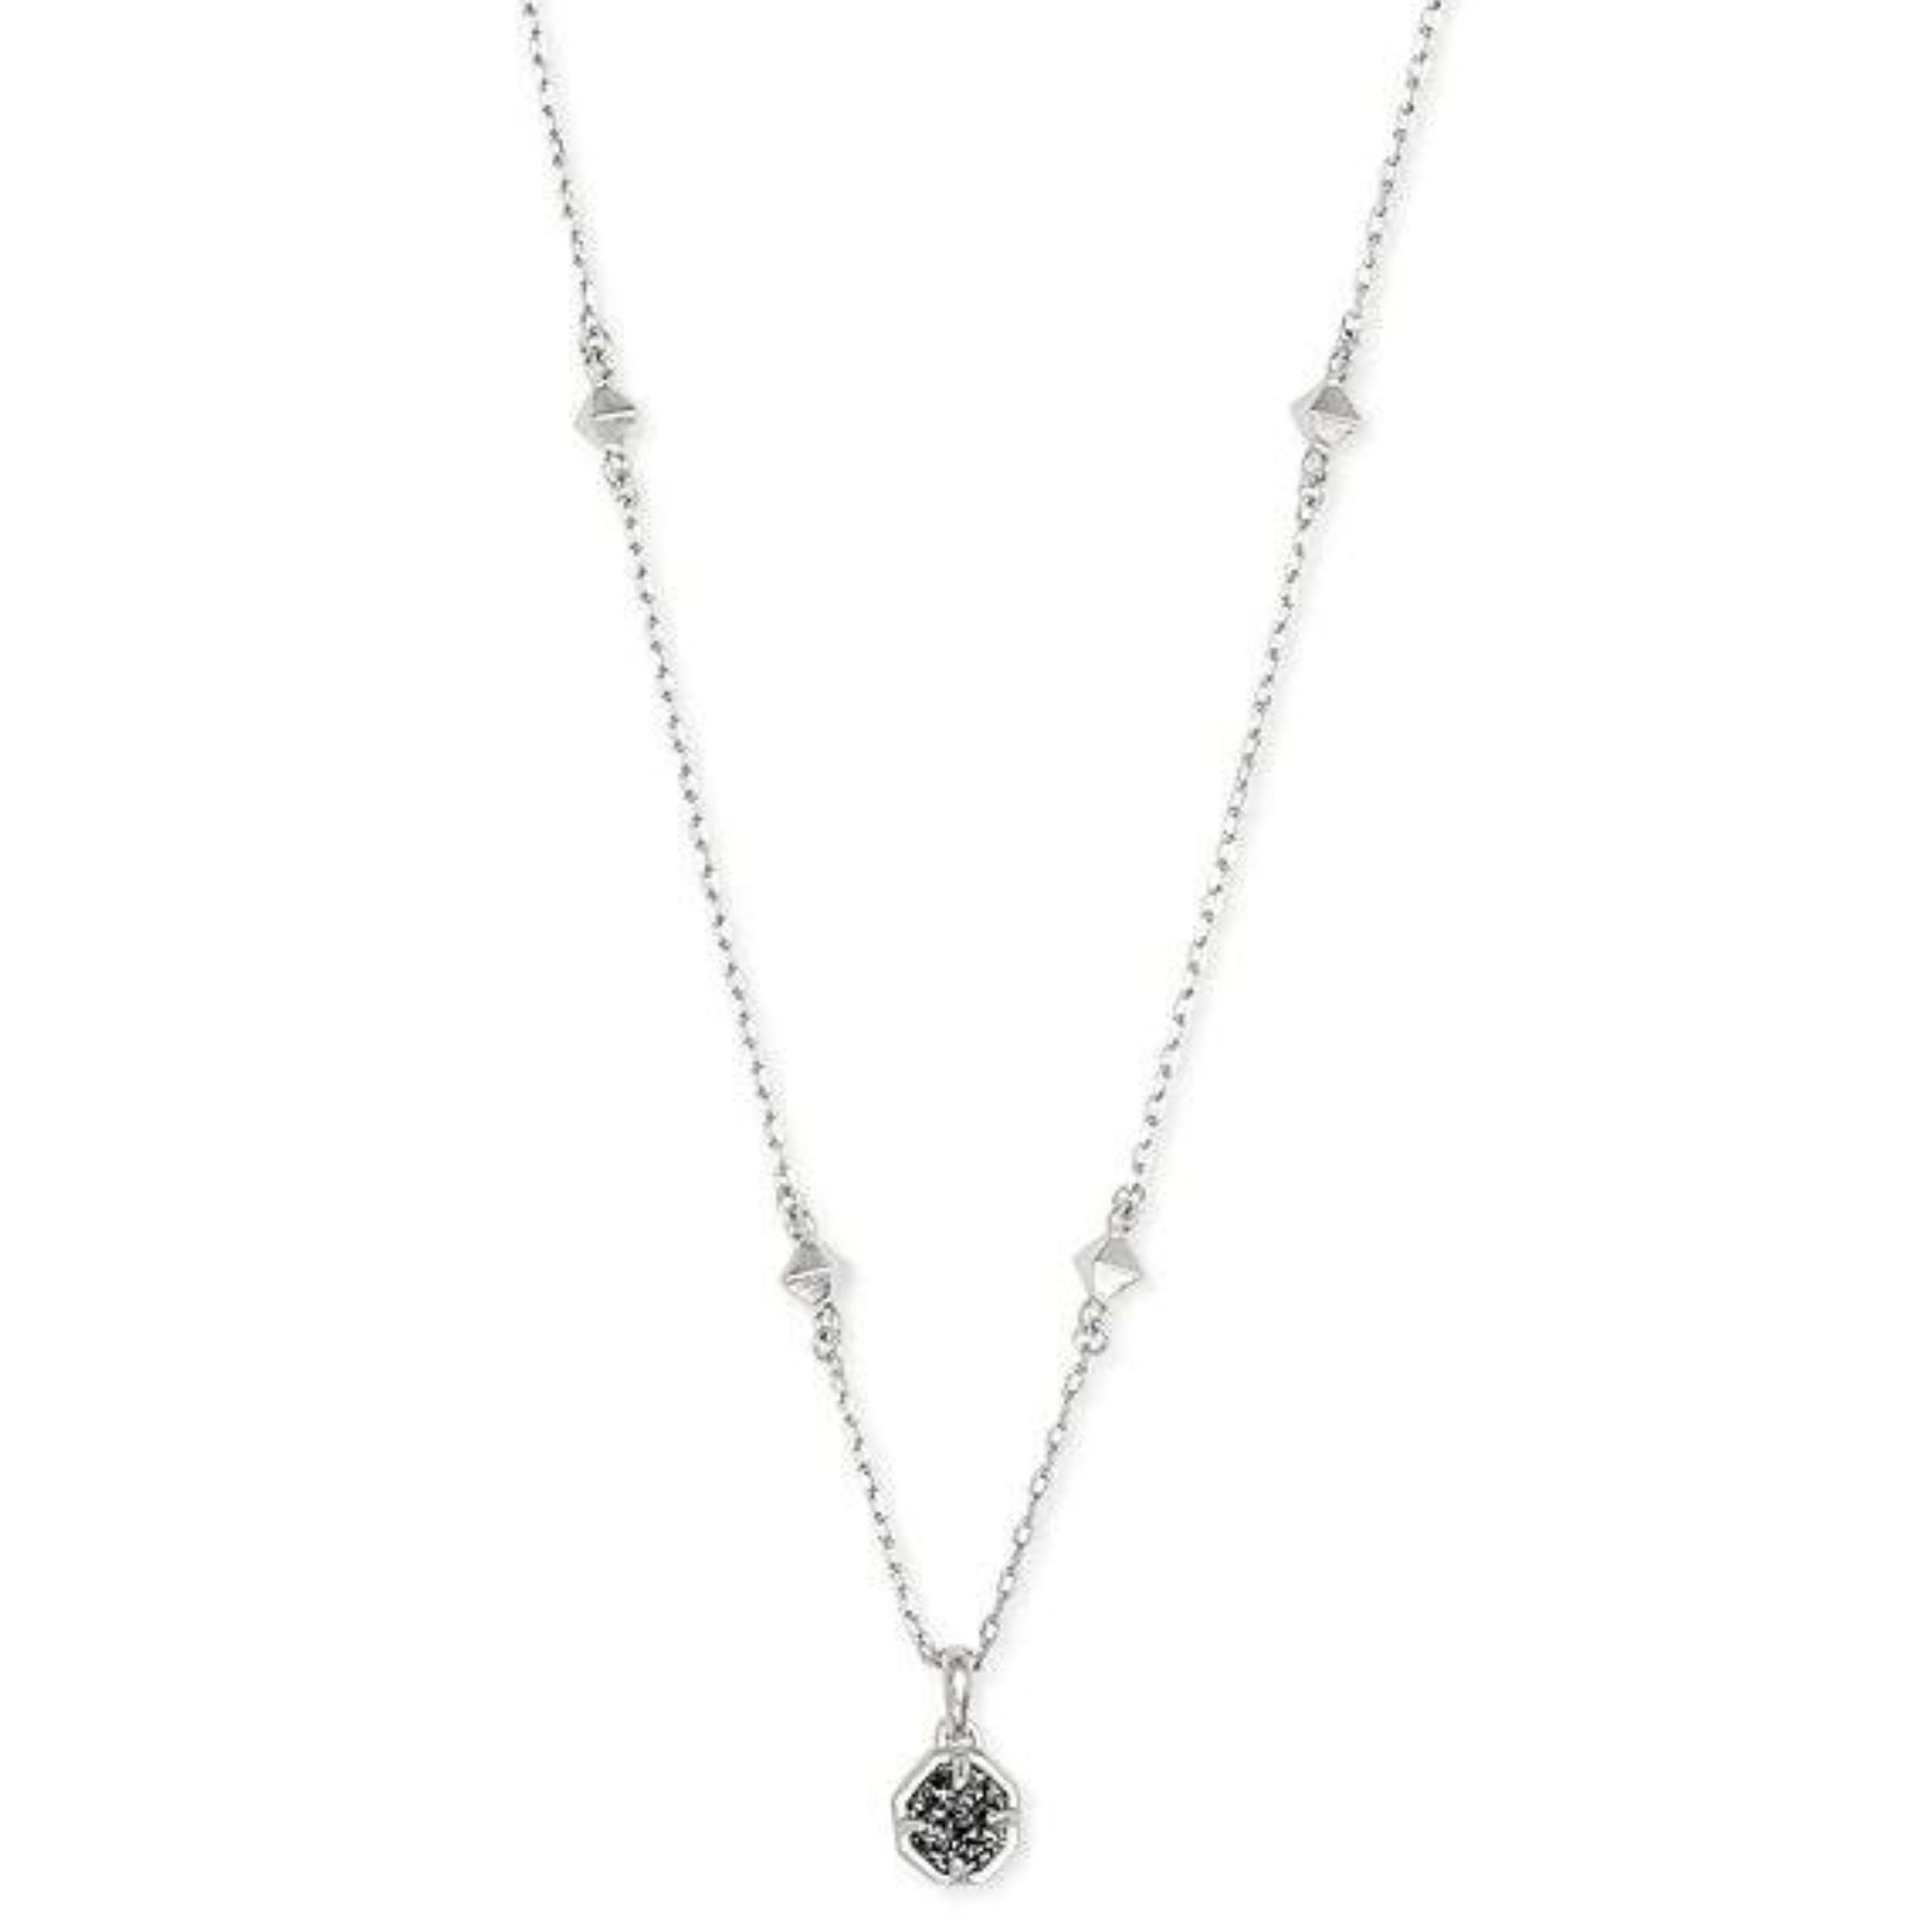 Kendra Scott | Nola Silver Pendant Necklace in Platinum Drusy - Giddy Up Glamour Boutique